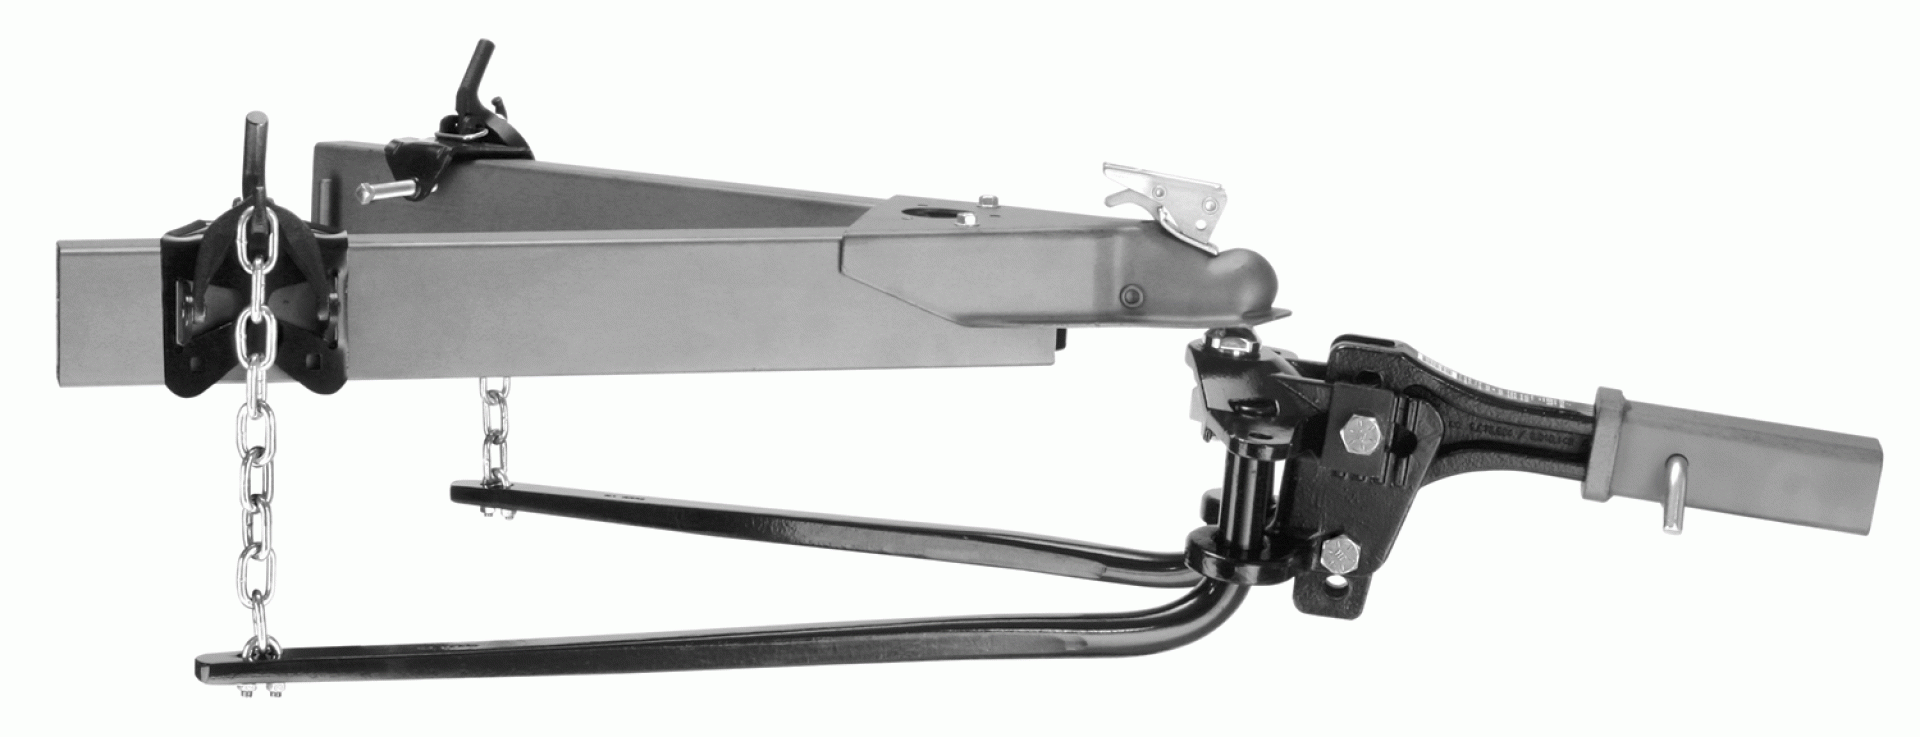 PRO SERIES | 49568-020 | HITCH WEIGHT DISTRIBUTION 600 LBS WITH 54970 HITCH BAR PRO SERIES RB2